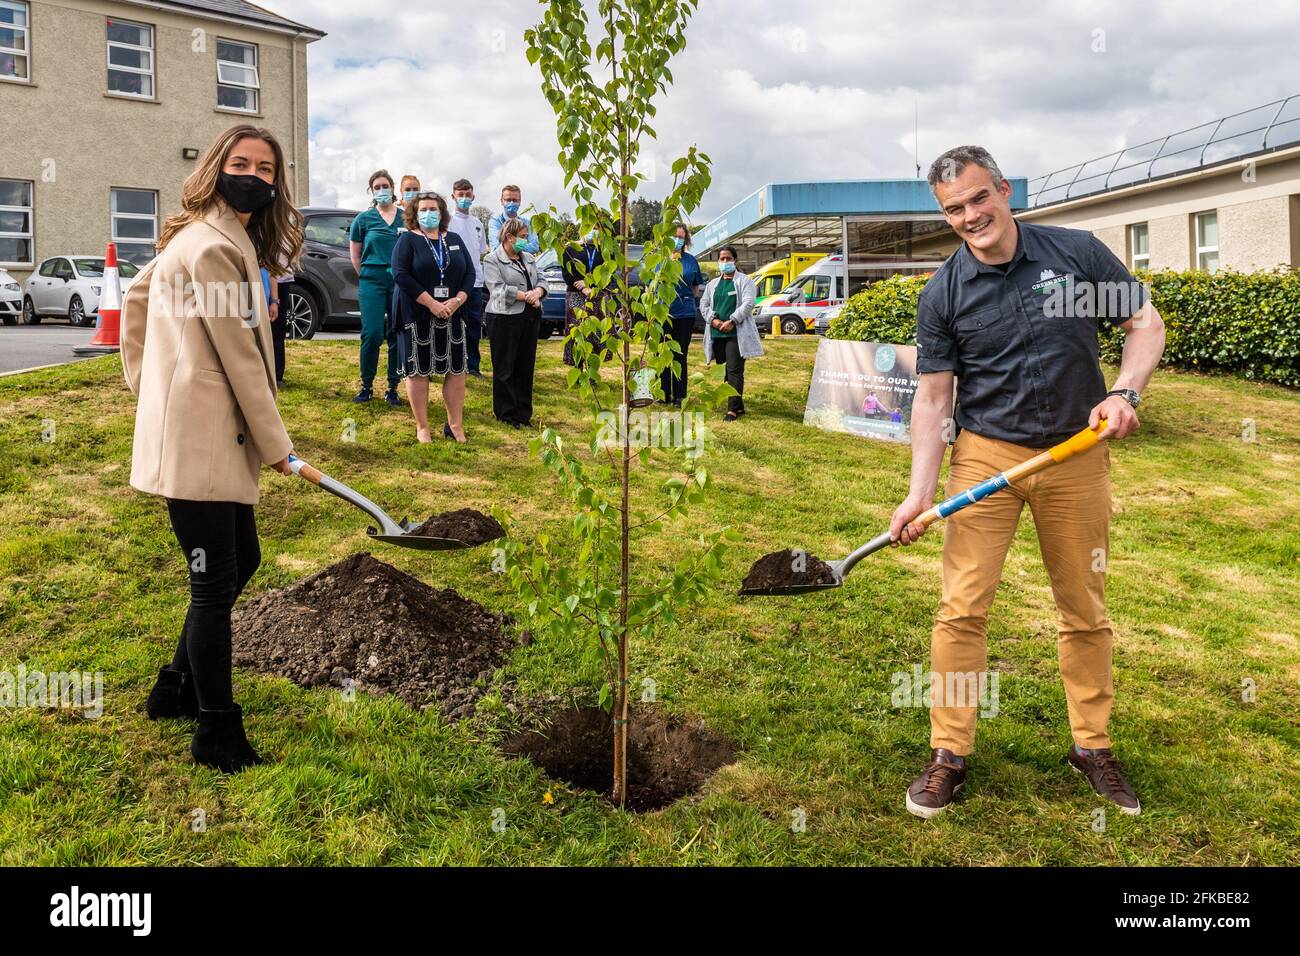 Bantry, West Cork, Ireland. 30th Apr, 2021. Holly Cairns TD planted a birch and oak tree at Bantry General Hospital today as part of the 'Nurse a Tree' initiative. Nurse a Tree plans to plant a tree for every healthcare worker in Ireland, which amounts to 80,000, as a living legacy. Assisting Holly with the planting of a birch tree is Maurice Ryan, Director of Green Belt LTD with Bantry Hospital Nurses watching on. Credit: AG News/Alamy Live News Stock Photo